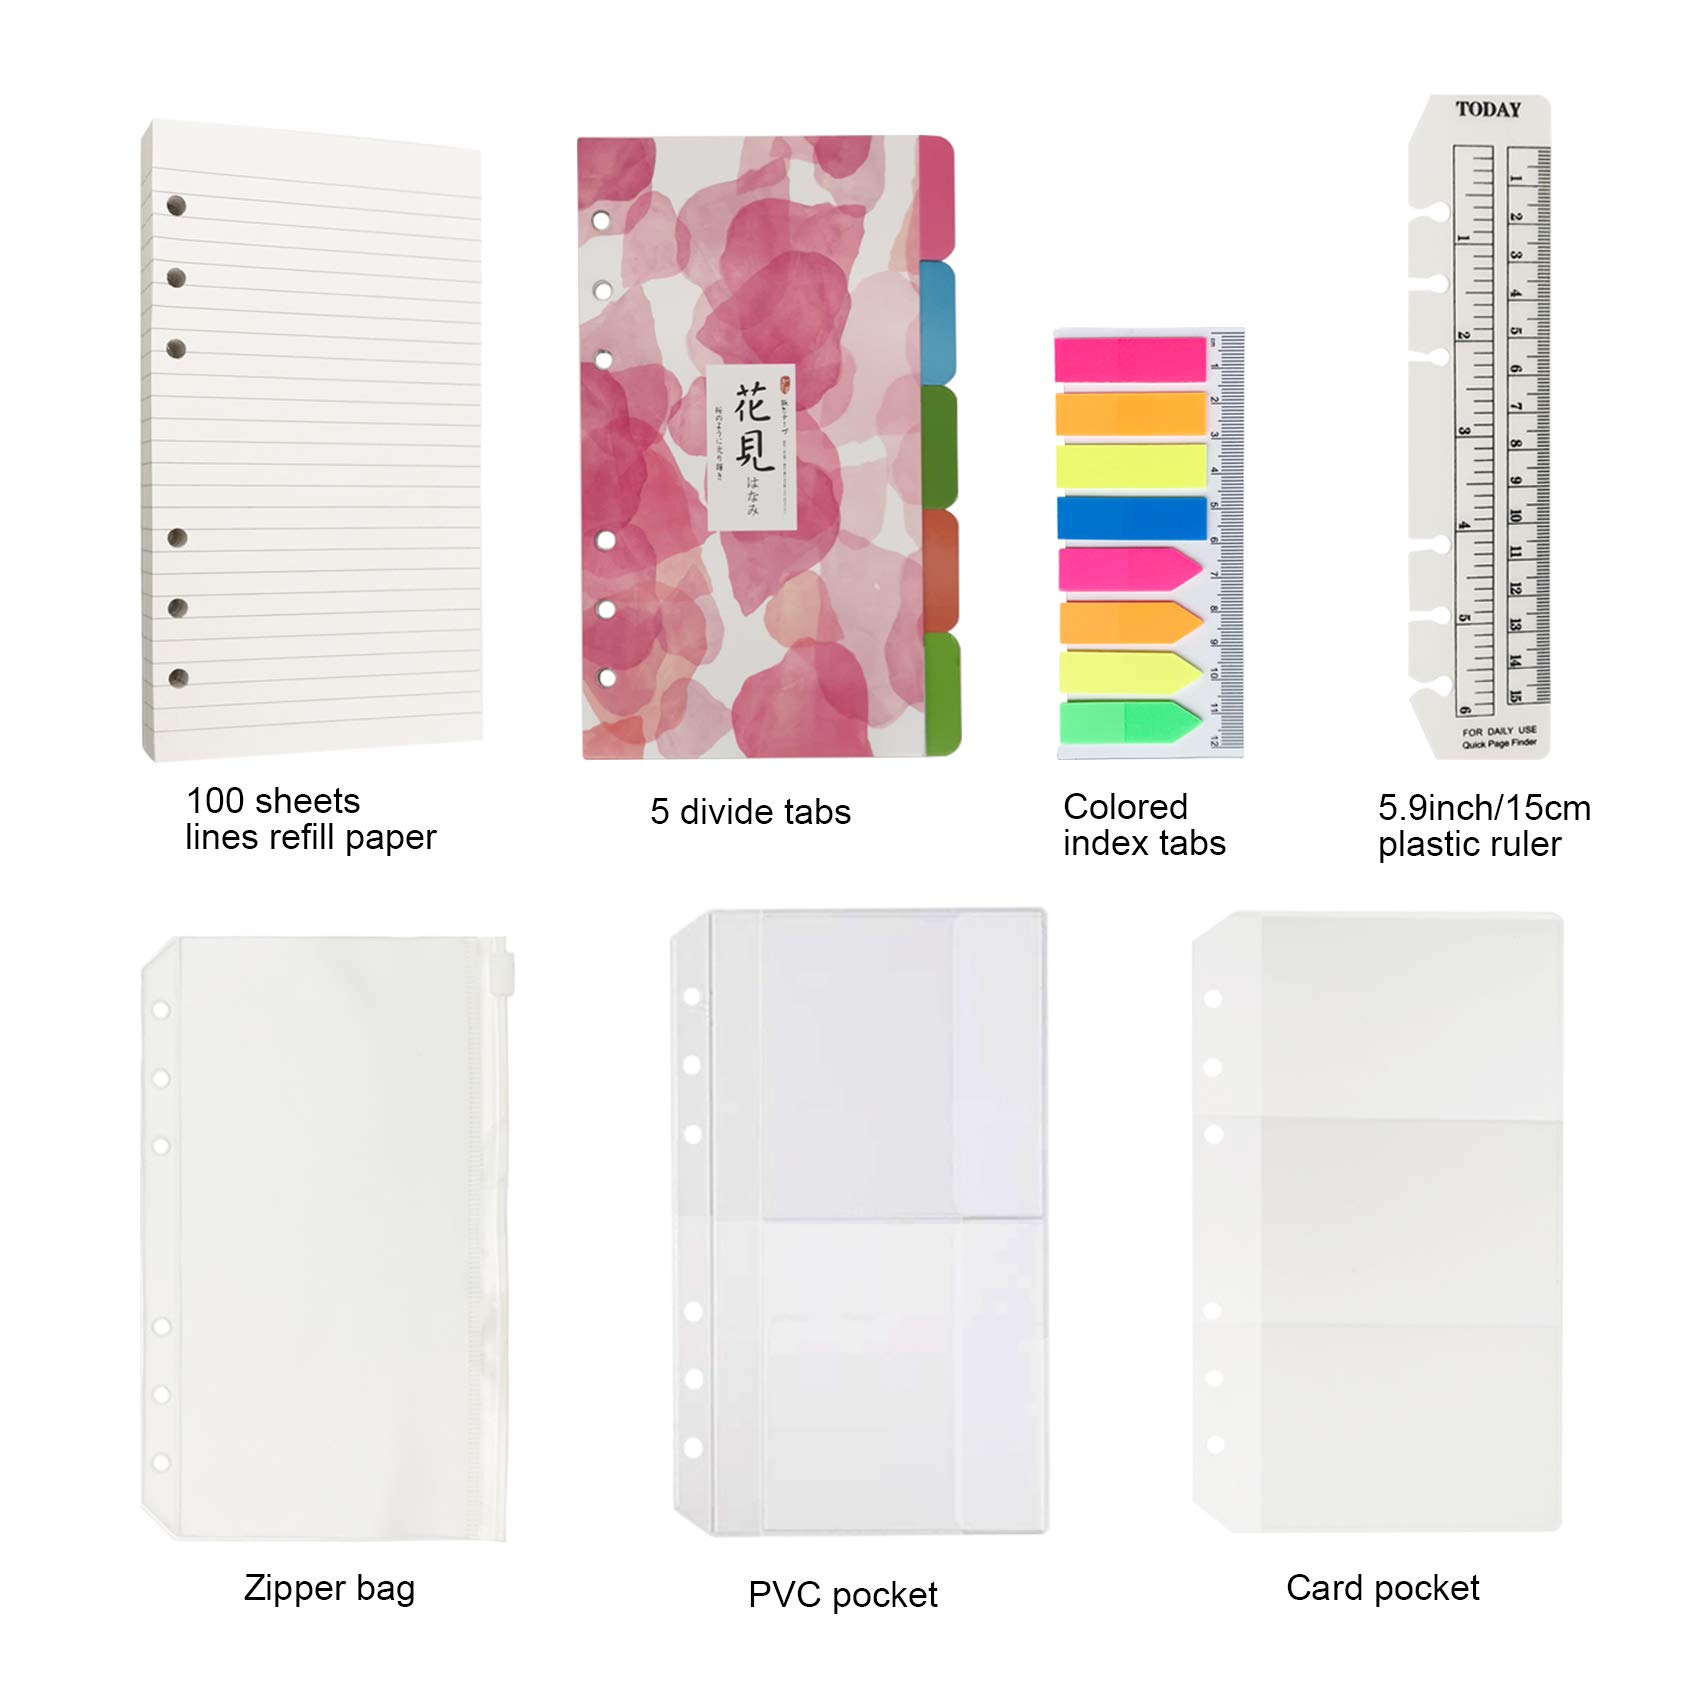 A6 Refill Paper, 100 Sheets Lined Paper, 6 Hole Punched - 5 Binder Dividers, 3 PVC Pouches, 160 Colored Index Tabs, 1 Quick Page Finder, for Filofax Personal Planners, 3.75 x 6.75 Inch